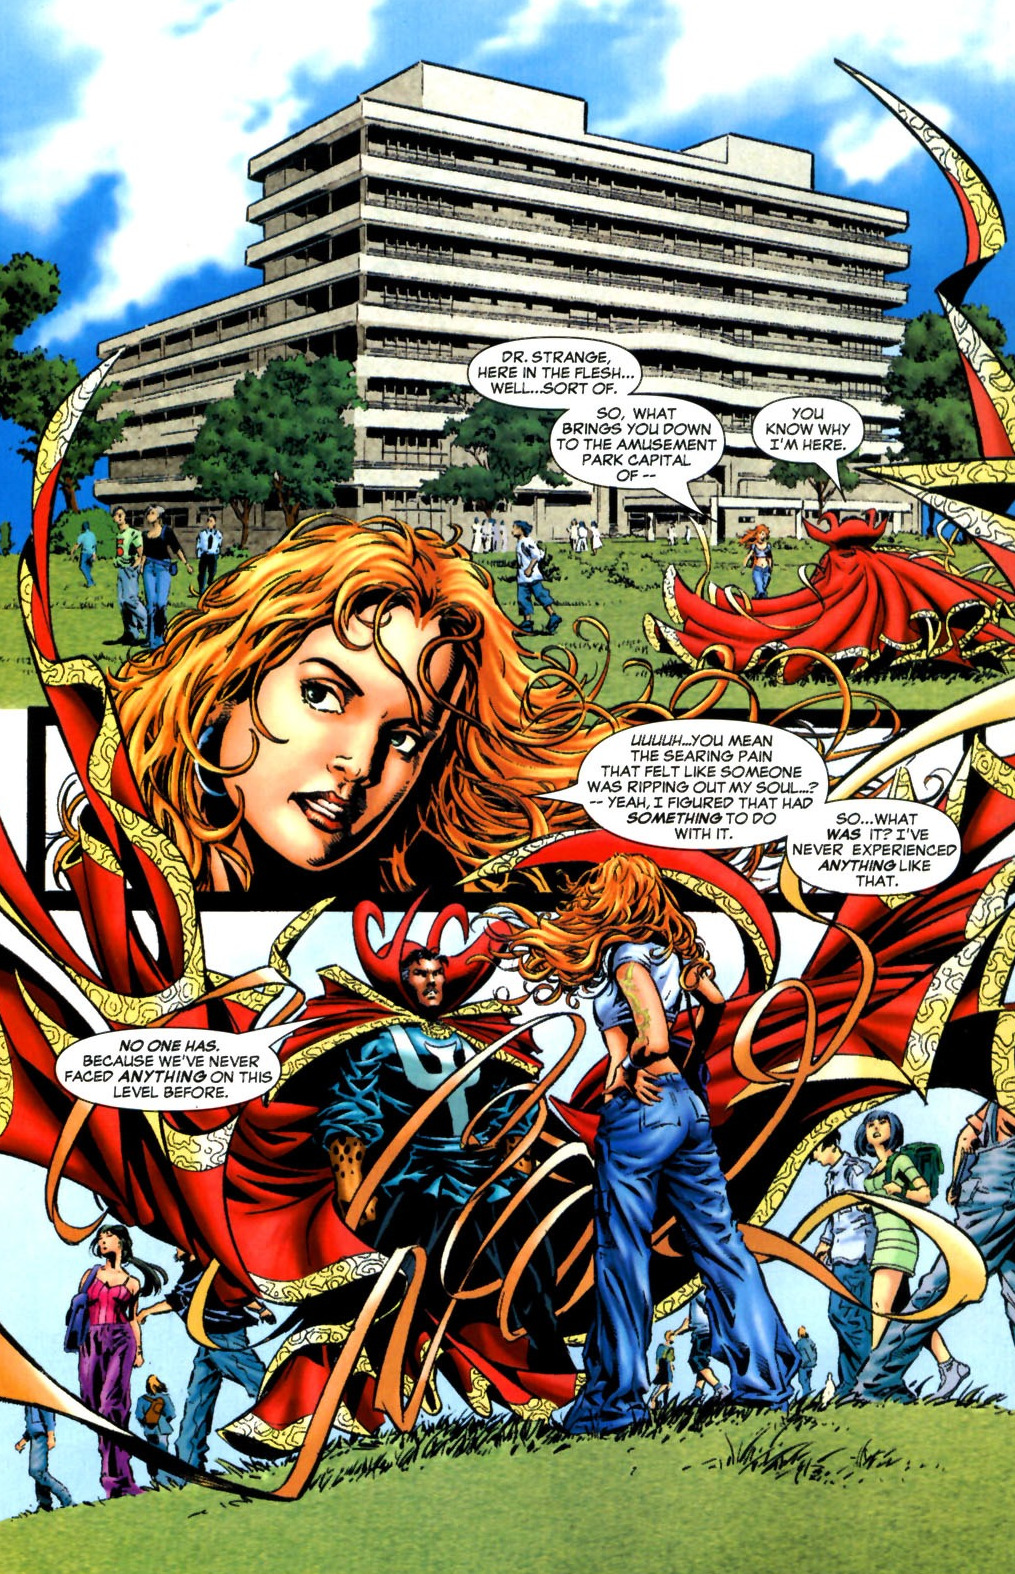 Doctor Strange requests the help of Jennifer Kale in Witches Vol. 1 #1 "The Gathering' (2004), Marvel Comics. Words by Brian Patrick Walsh, art by Mike Deodato Jr., Michael Kelleher, and Dave Sharpe